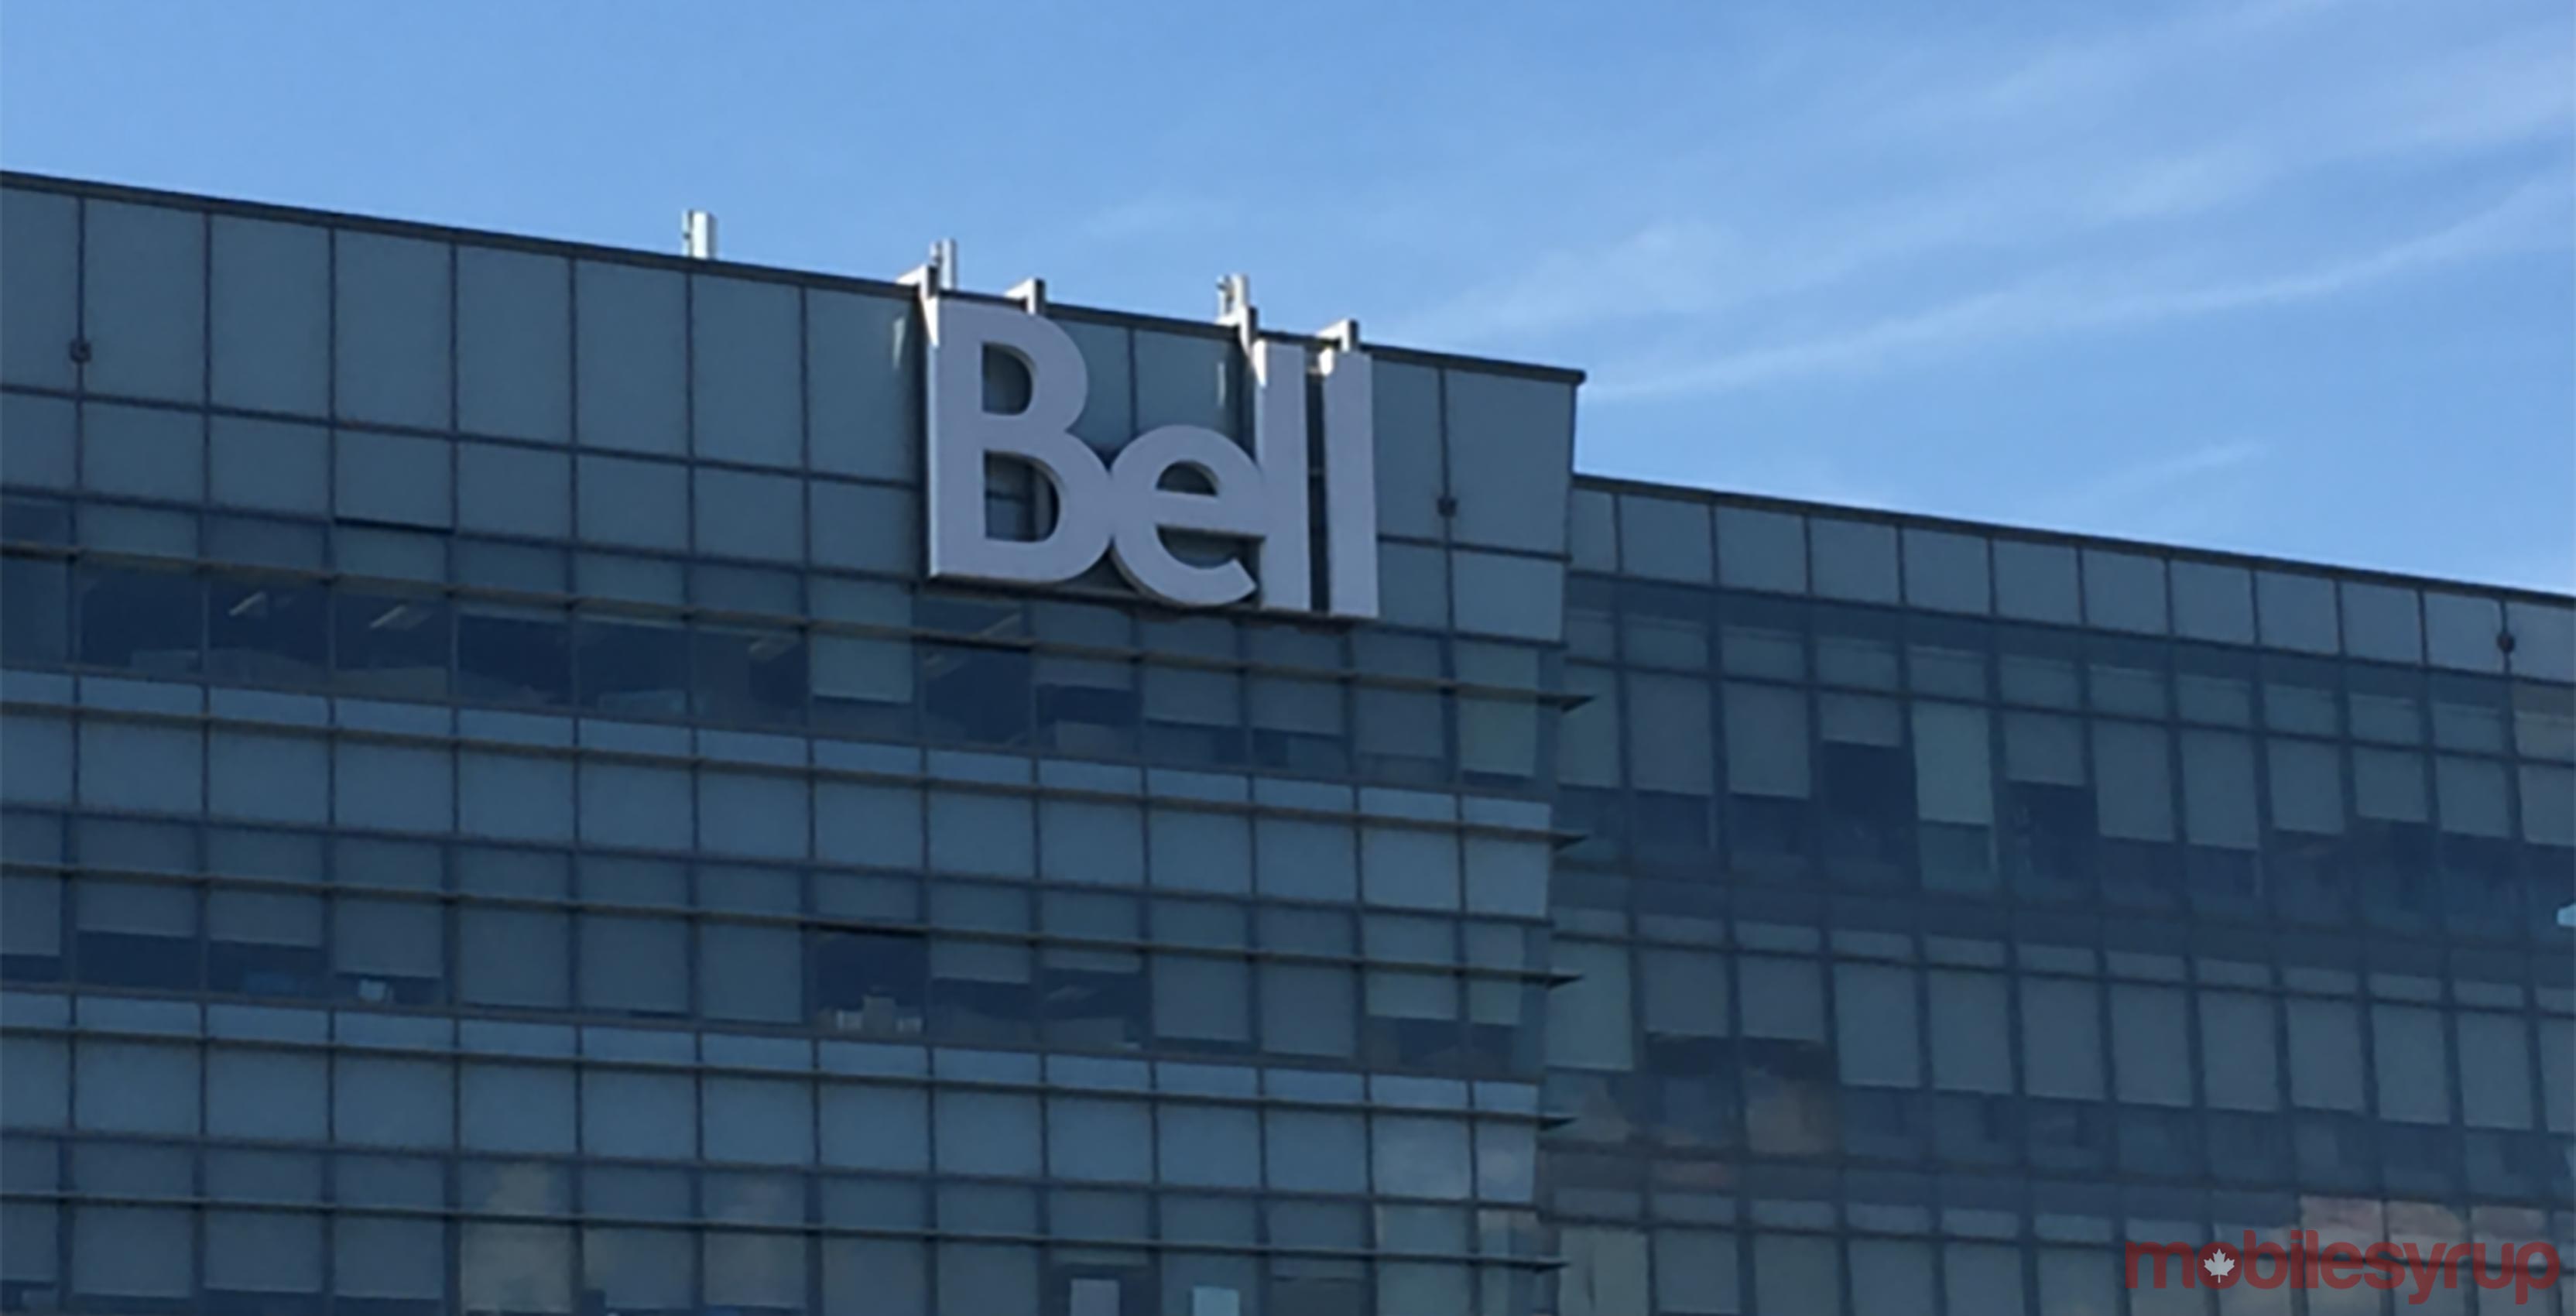 An image showing the Bell logo atop a corporate office